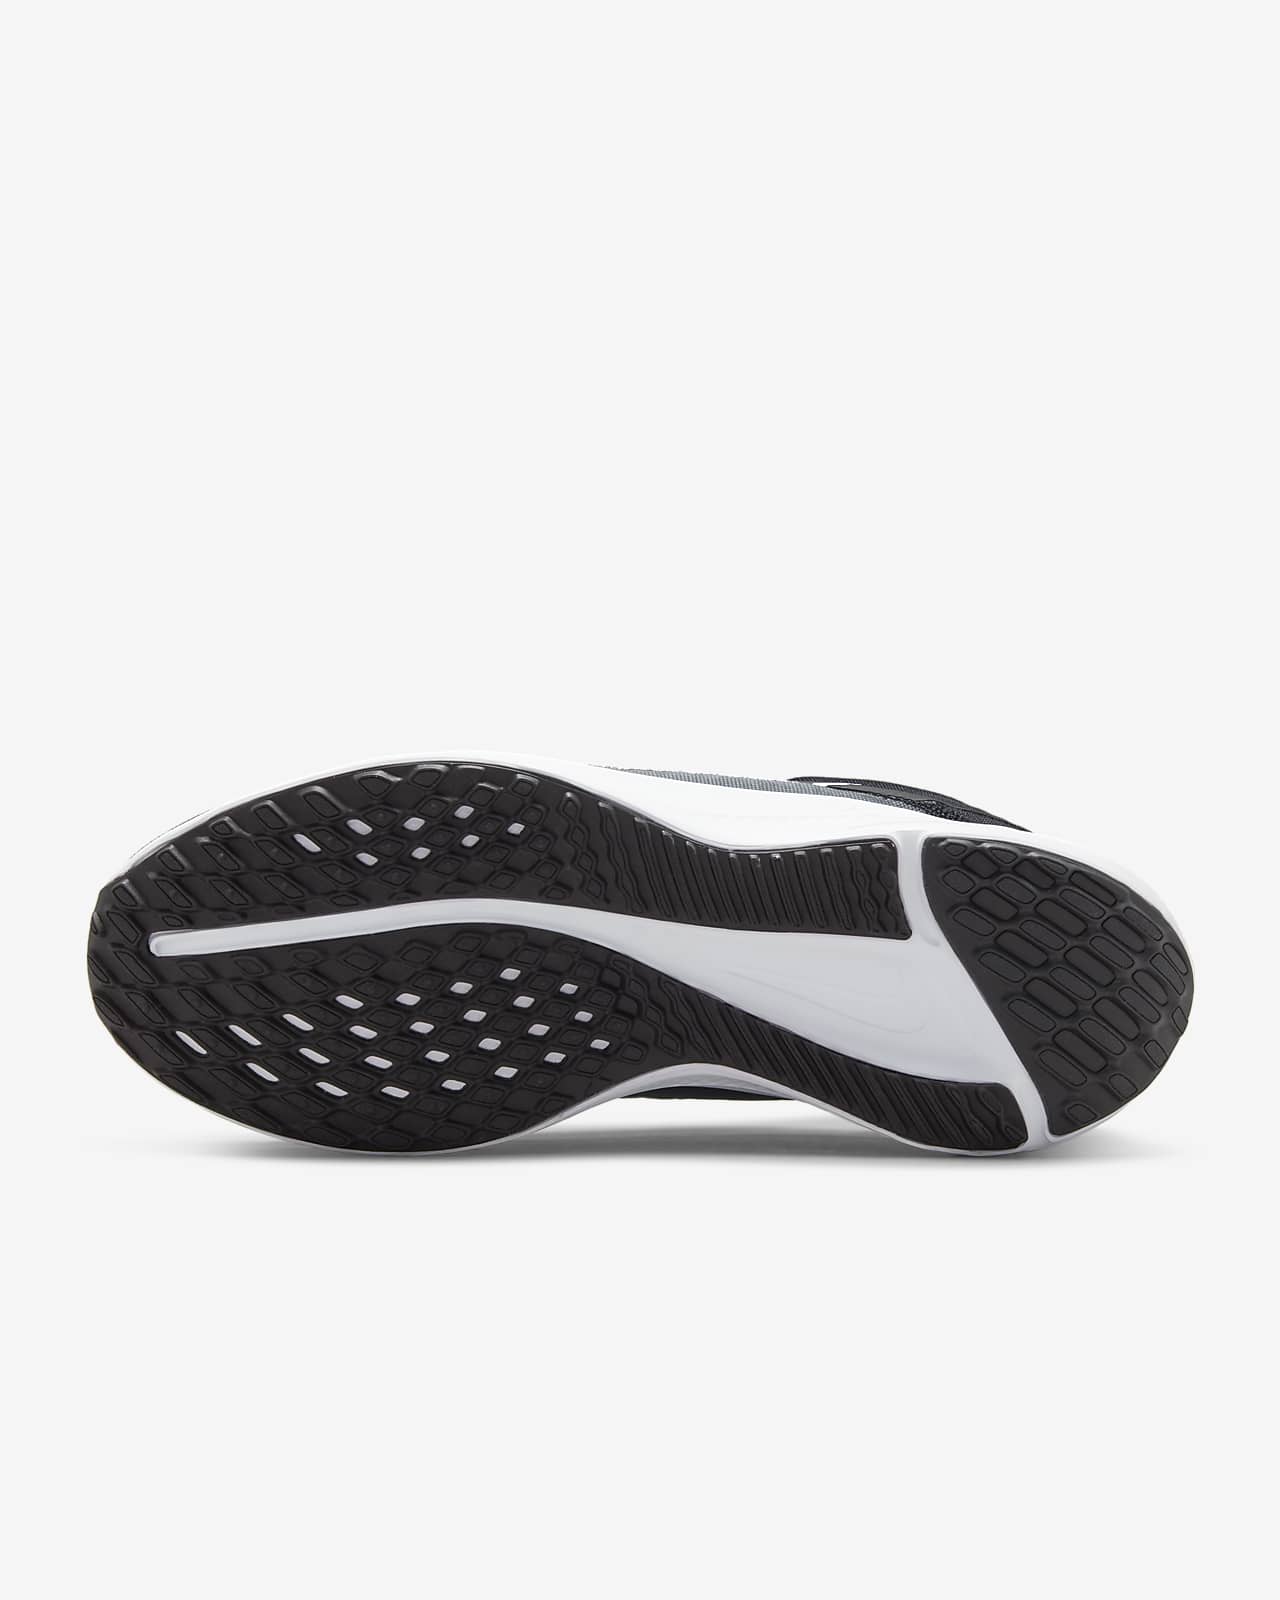 nike quest black and white